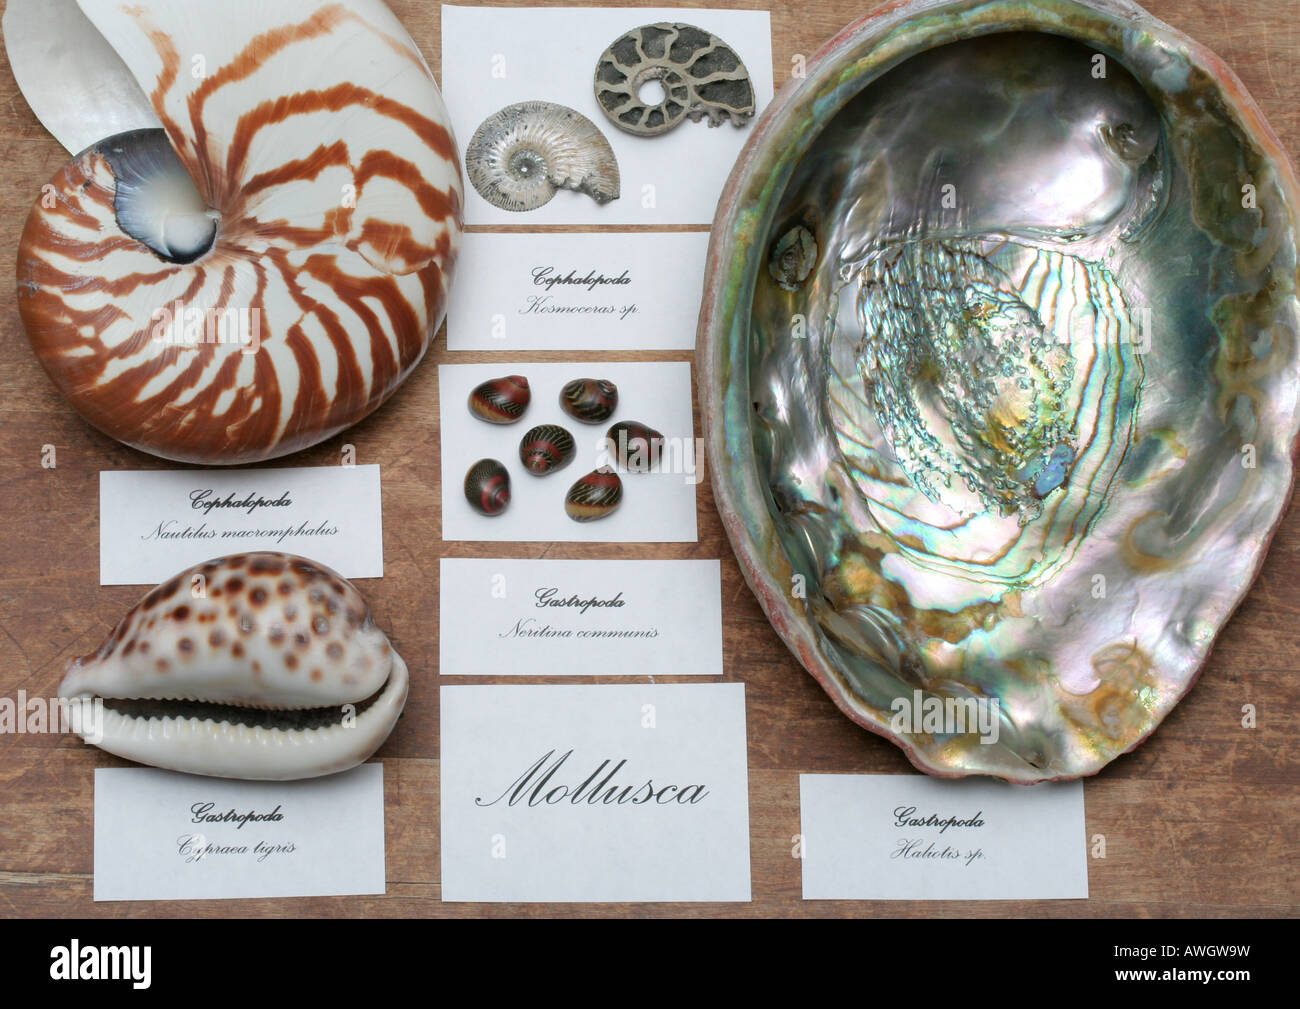 Classification of molluscs in a museum display Stock Photo